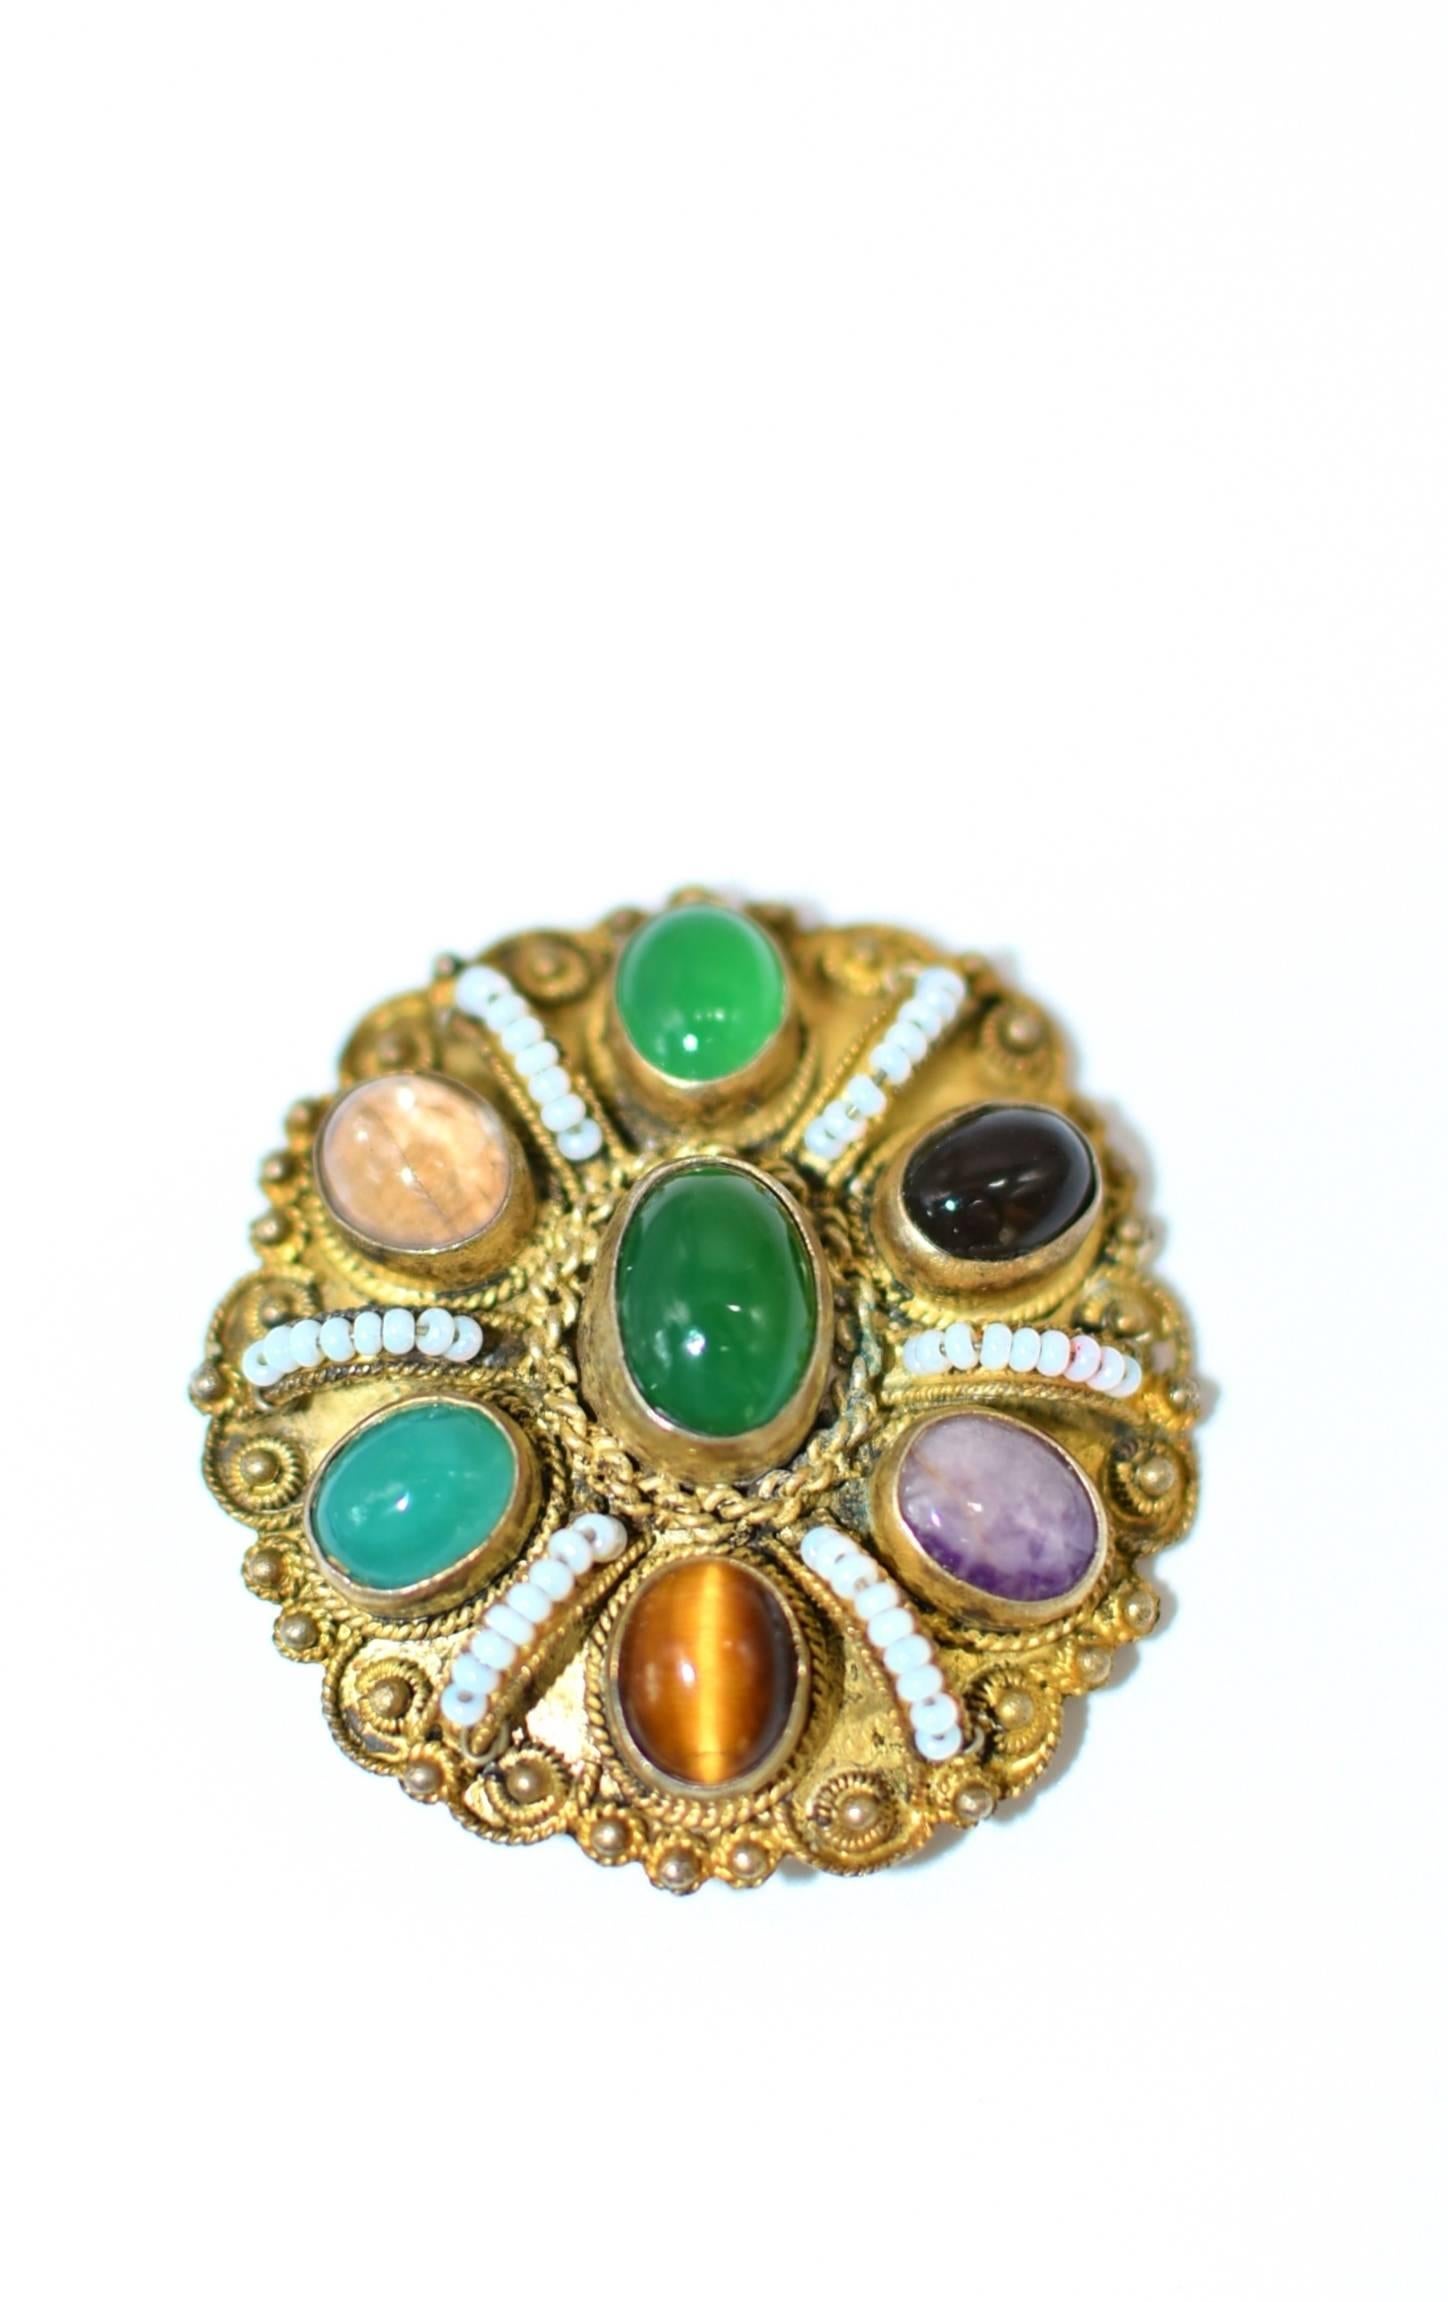 A stunning vintage piece. The brooch/pendant is encrusted with seven beautiful gemstones, including jade, crystal, tiger's eye, aventurine, smoky quartz, serpentine and amethyst. It is trimmed with delicate fancy scroll works. Six lines of white